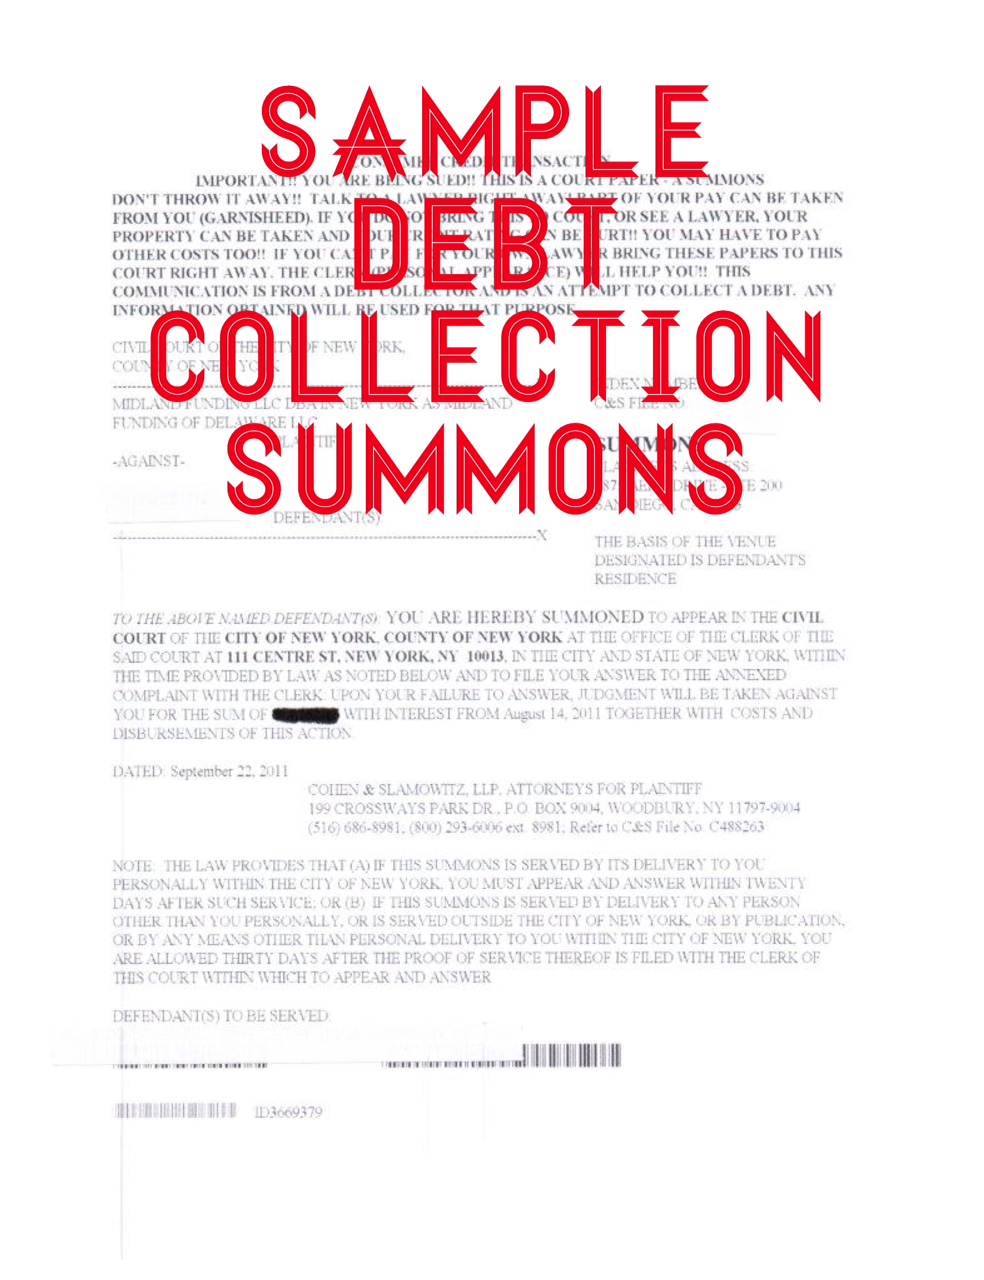 Sample Response Letter To The Court For A Debt Summons